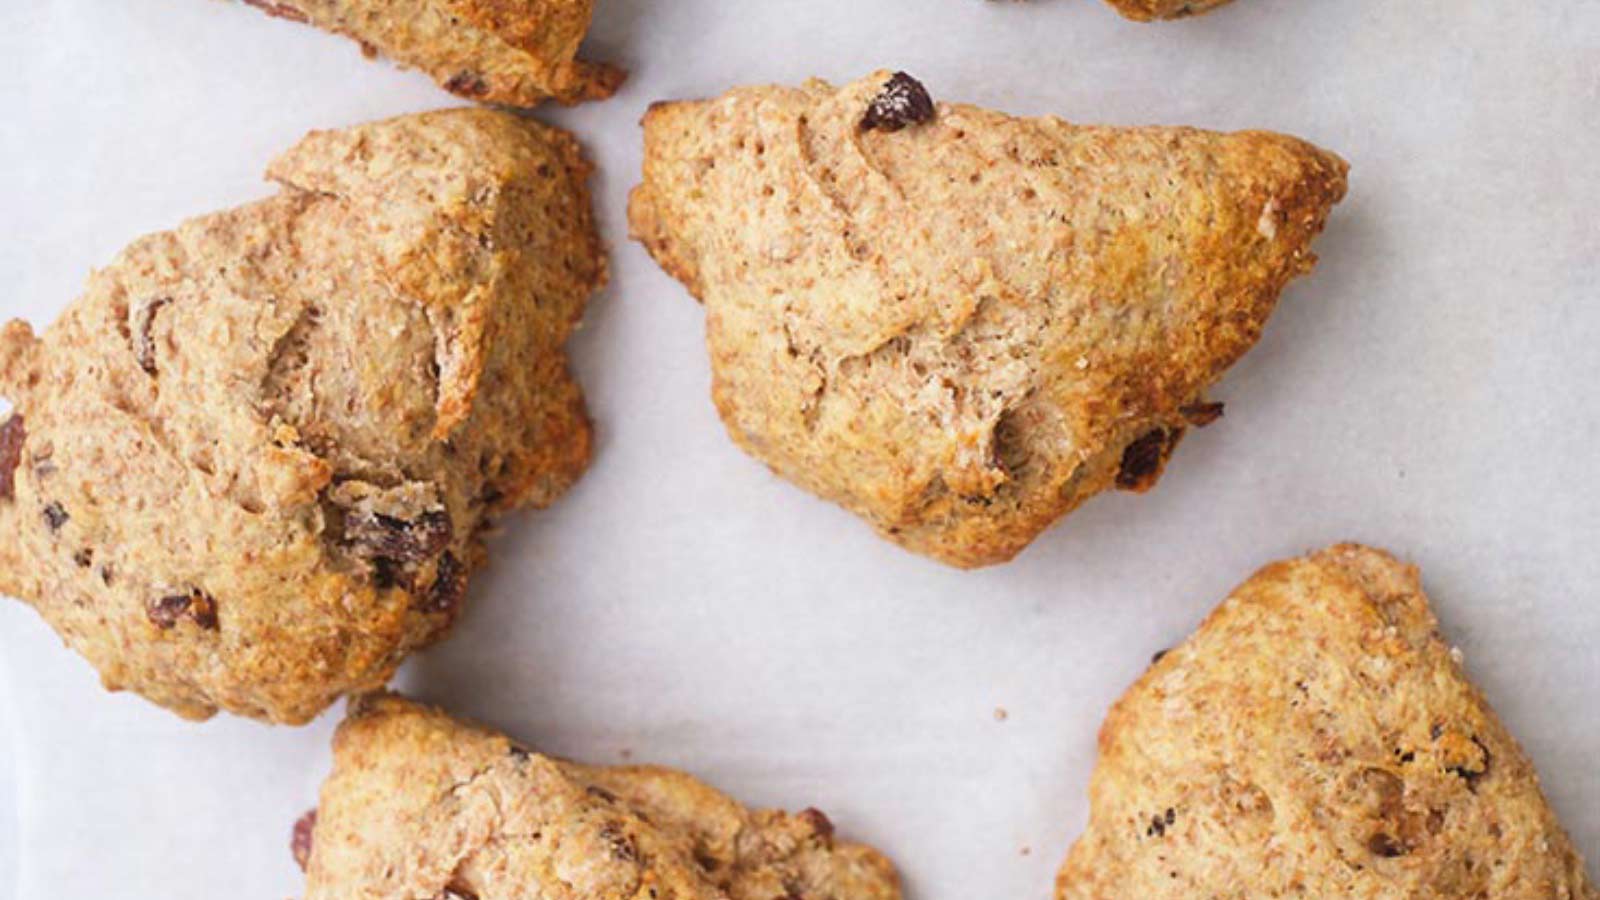 Just-baked Raisin Scones laying on a parchment-lined baking pan.